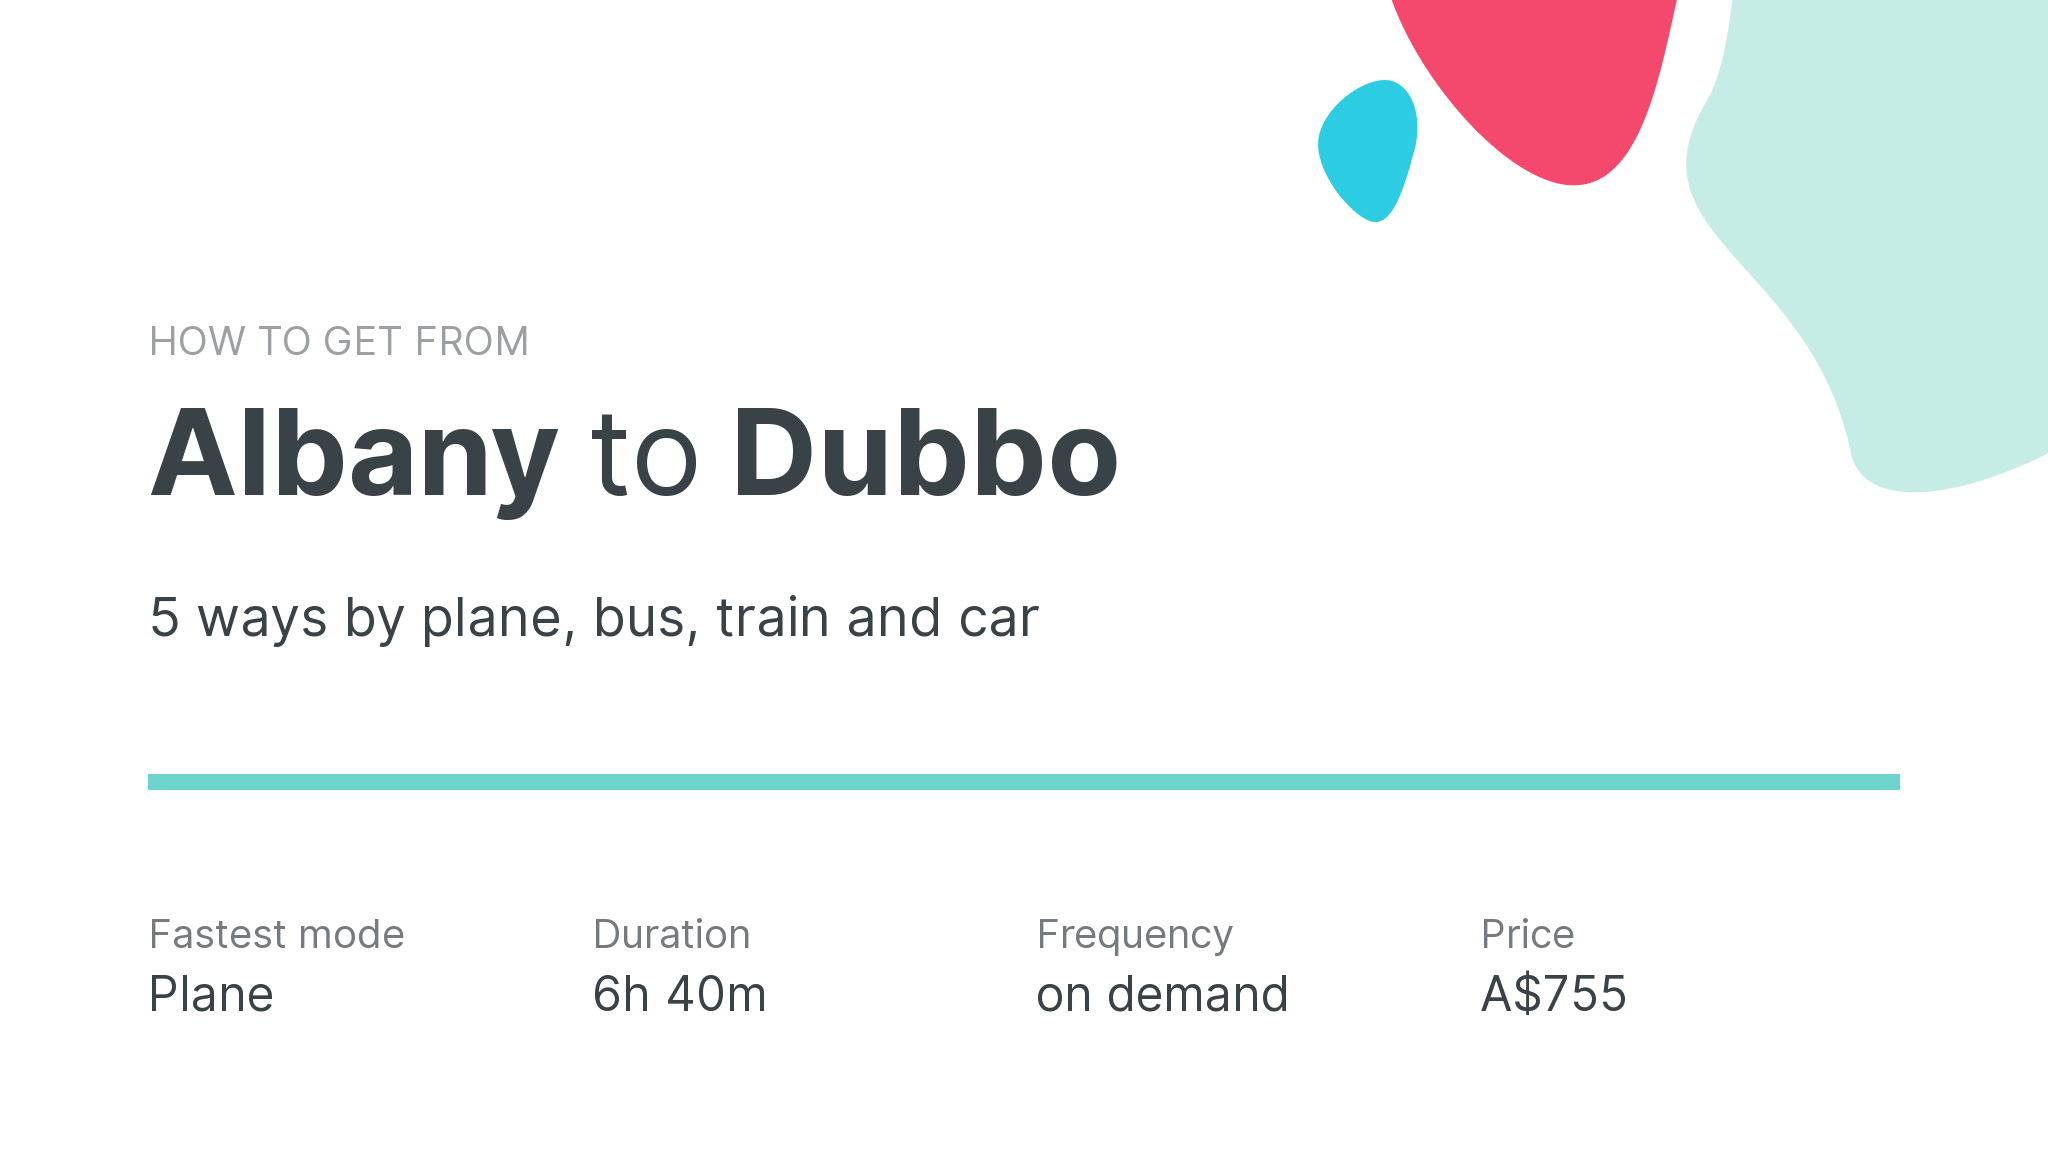 How do I get from Albany to Dubbo